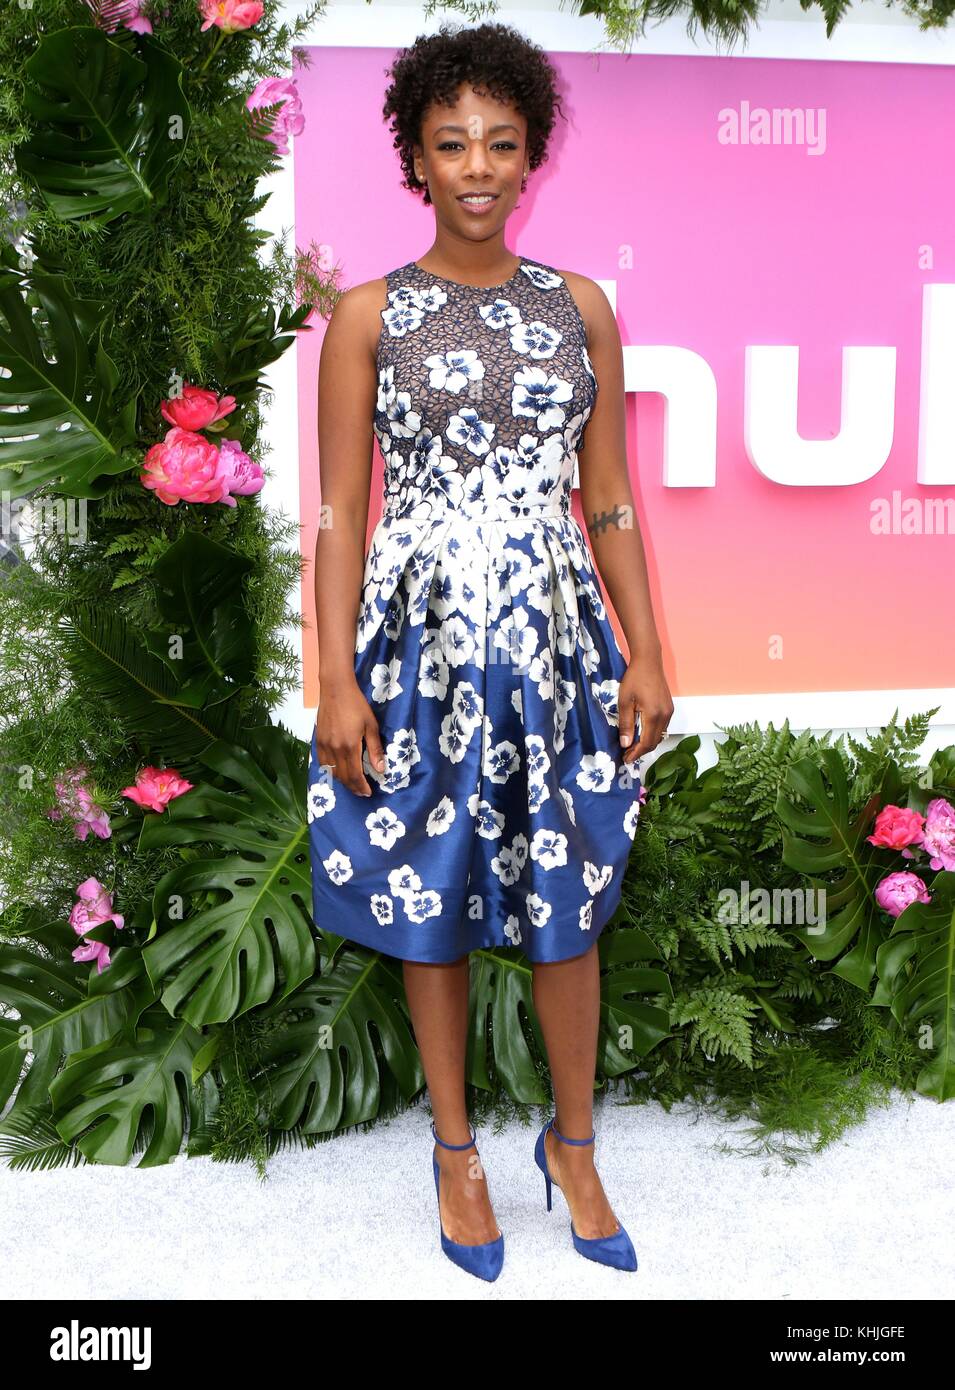 NEW YORK, NY - 03 MAI: Samira Wiley assiste à 2017 Hulu UpFront le 3 mai 2017 à New York personnes: Samira Wiley transmission Ref: MNC76 Banque D'Images